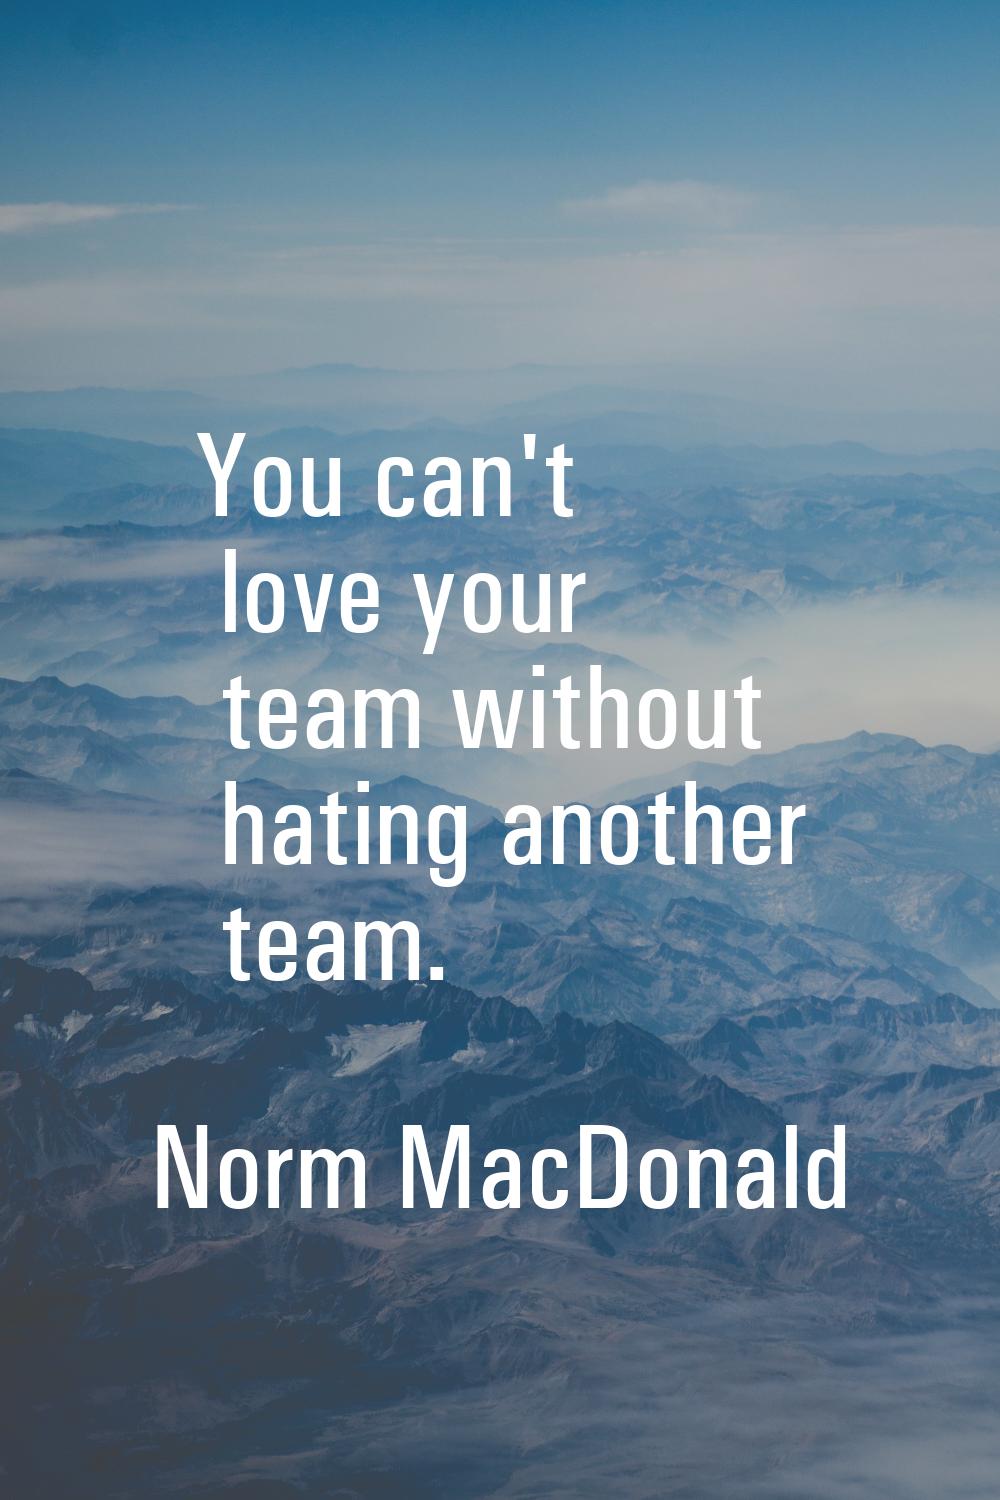 You can't love your team without hating another team.